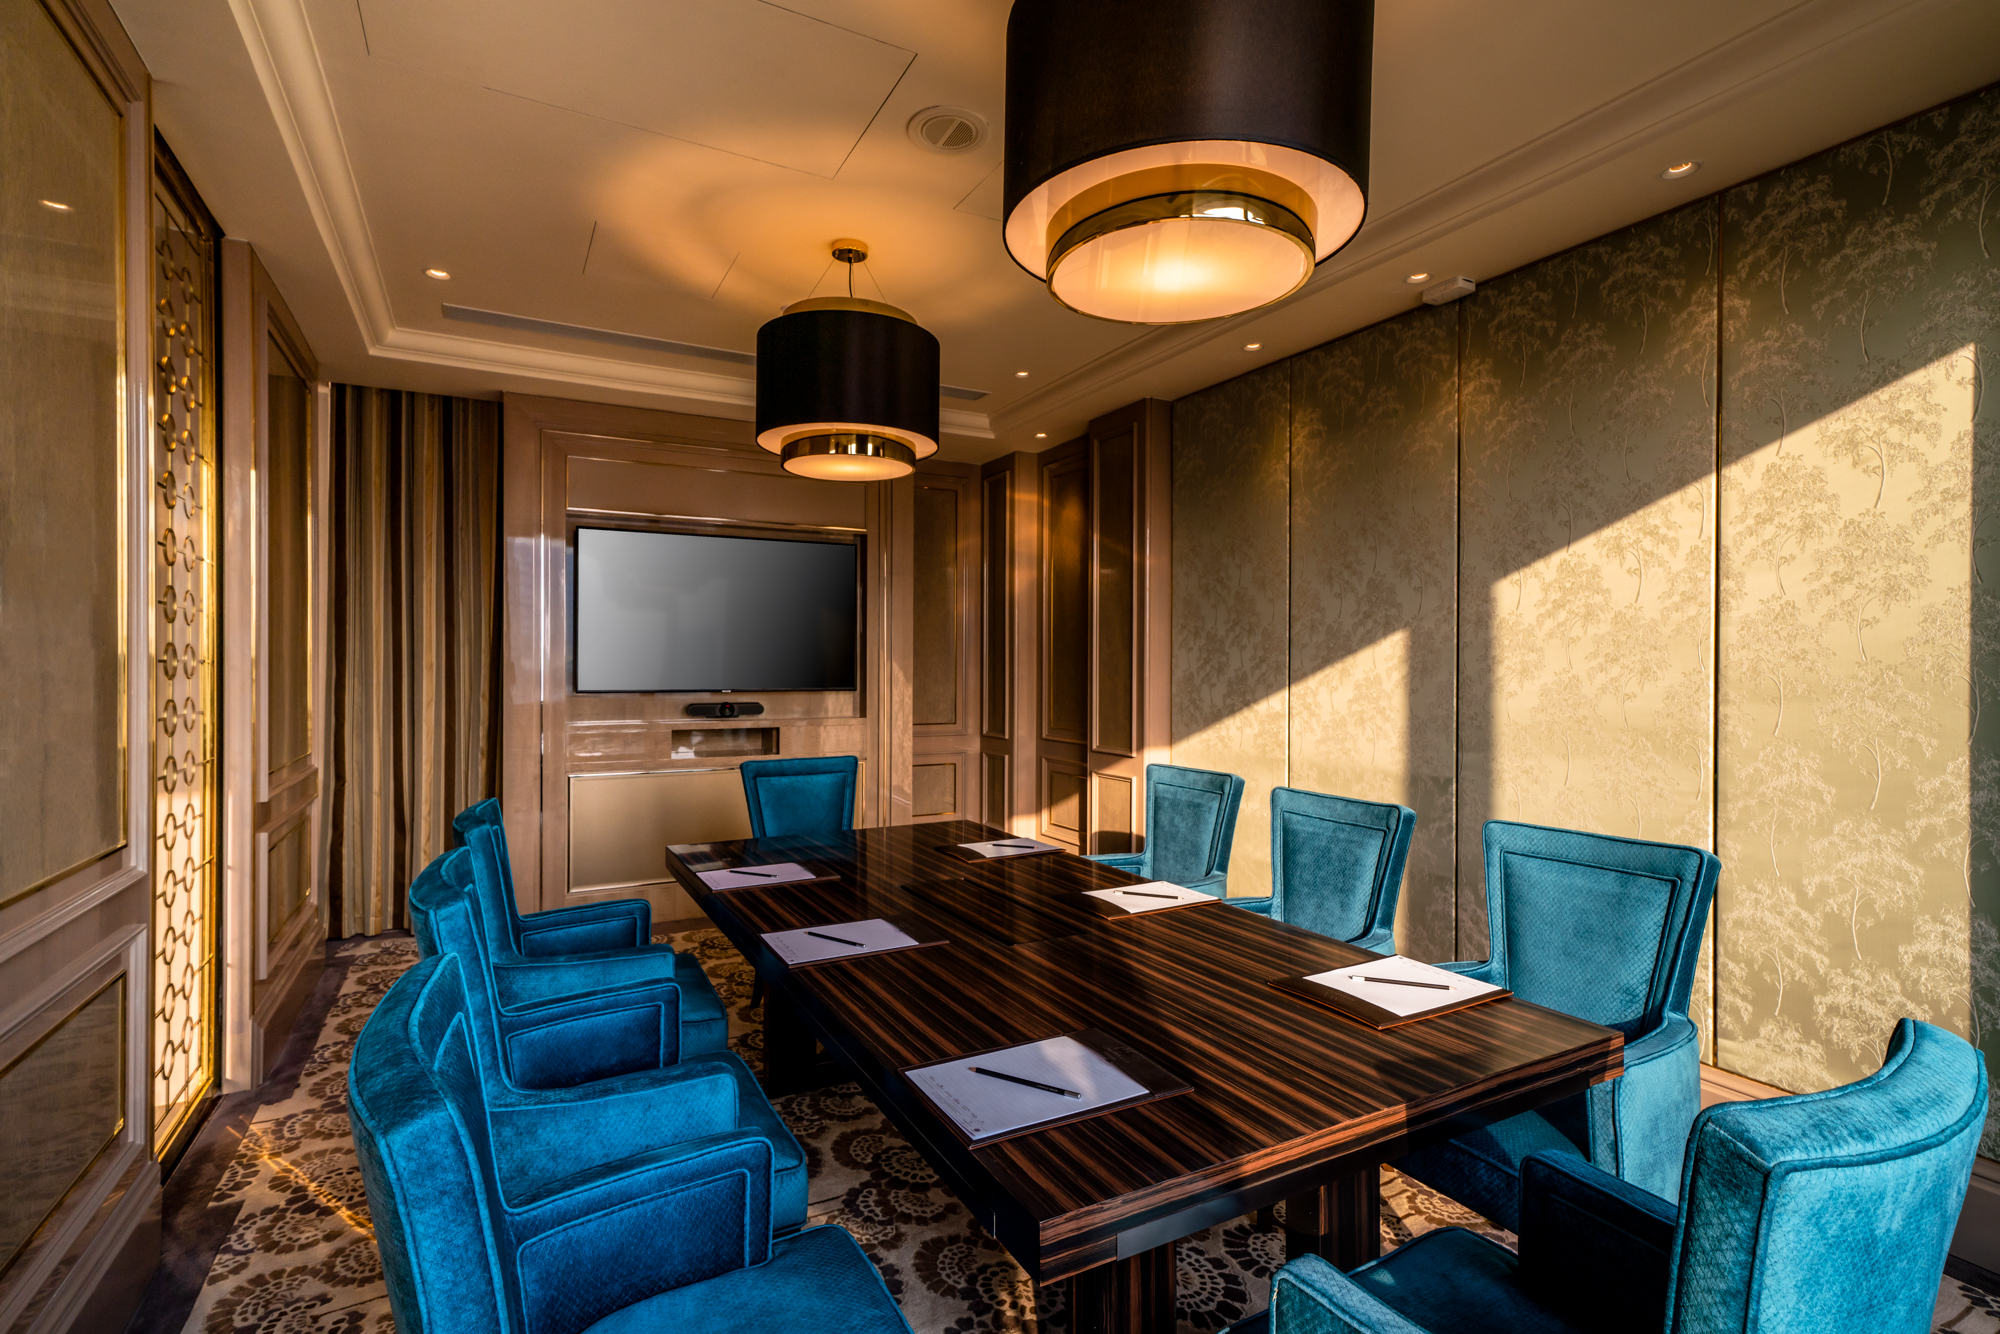 A colorful meeting room is bathed in light at a 5 star hotel in Vietnam